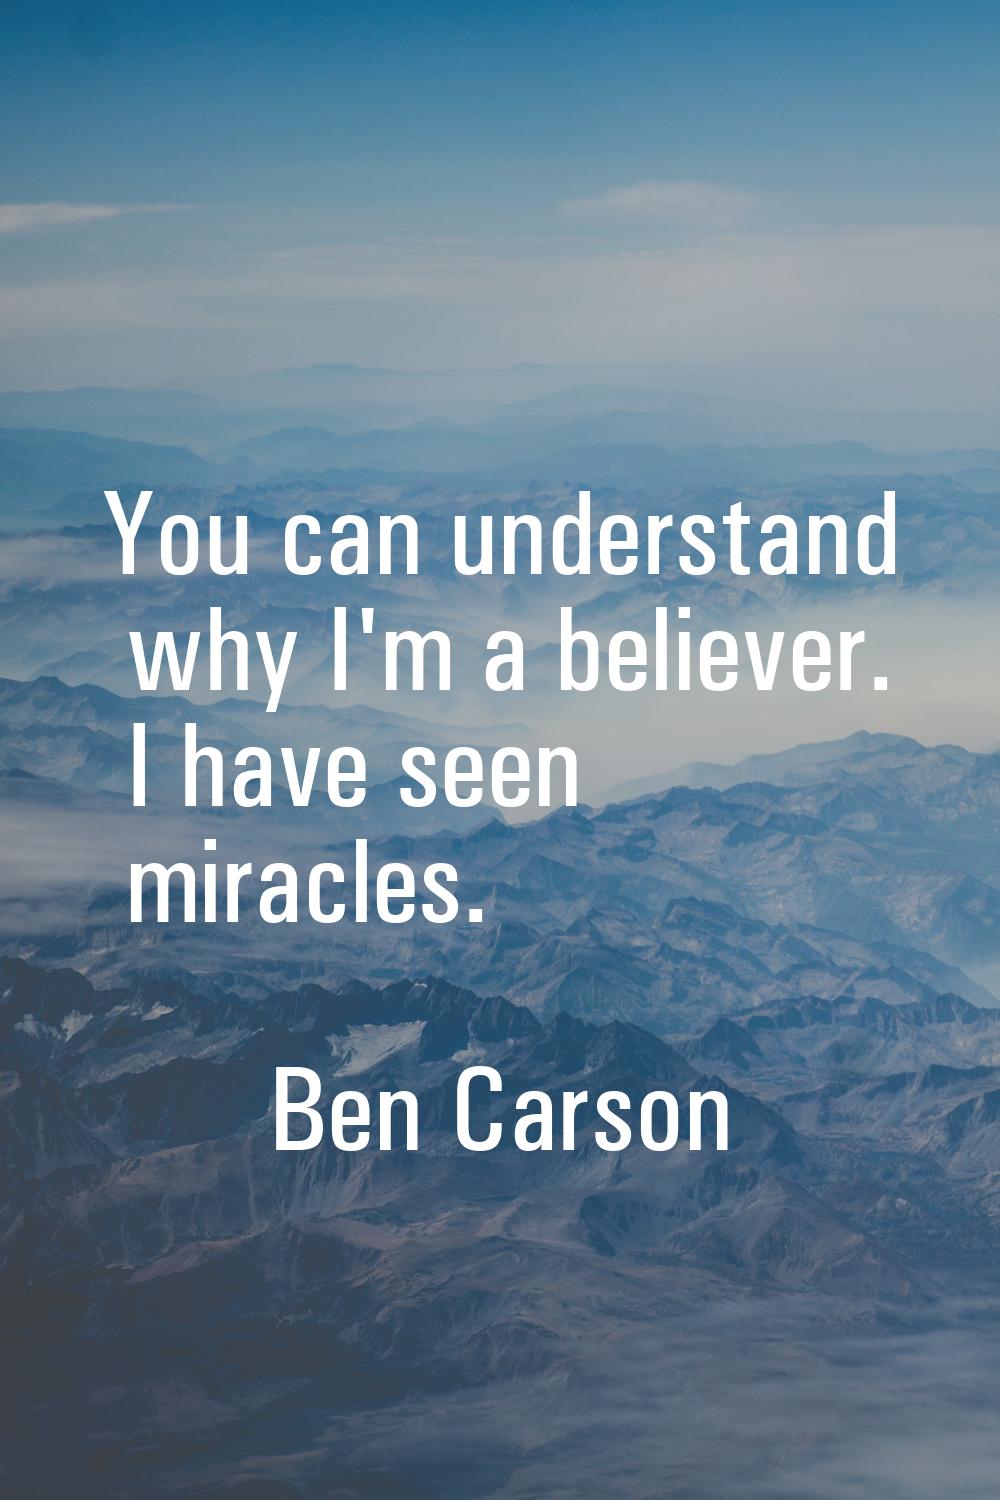 You can understand why I'm a believer. I have seen miracles.